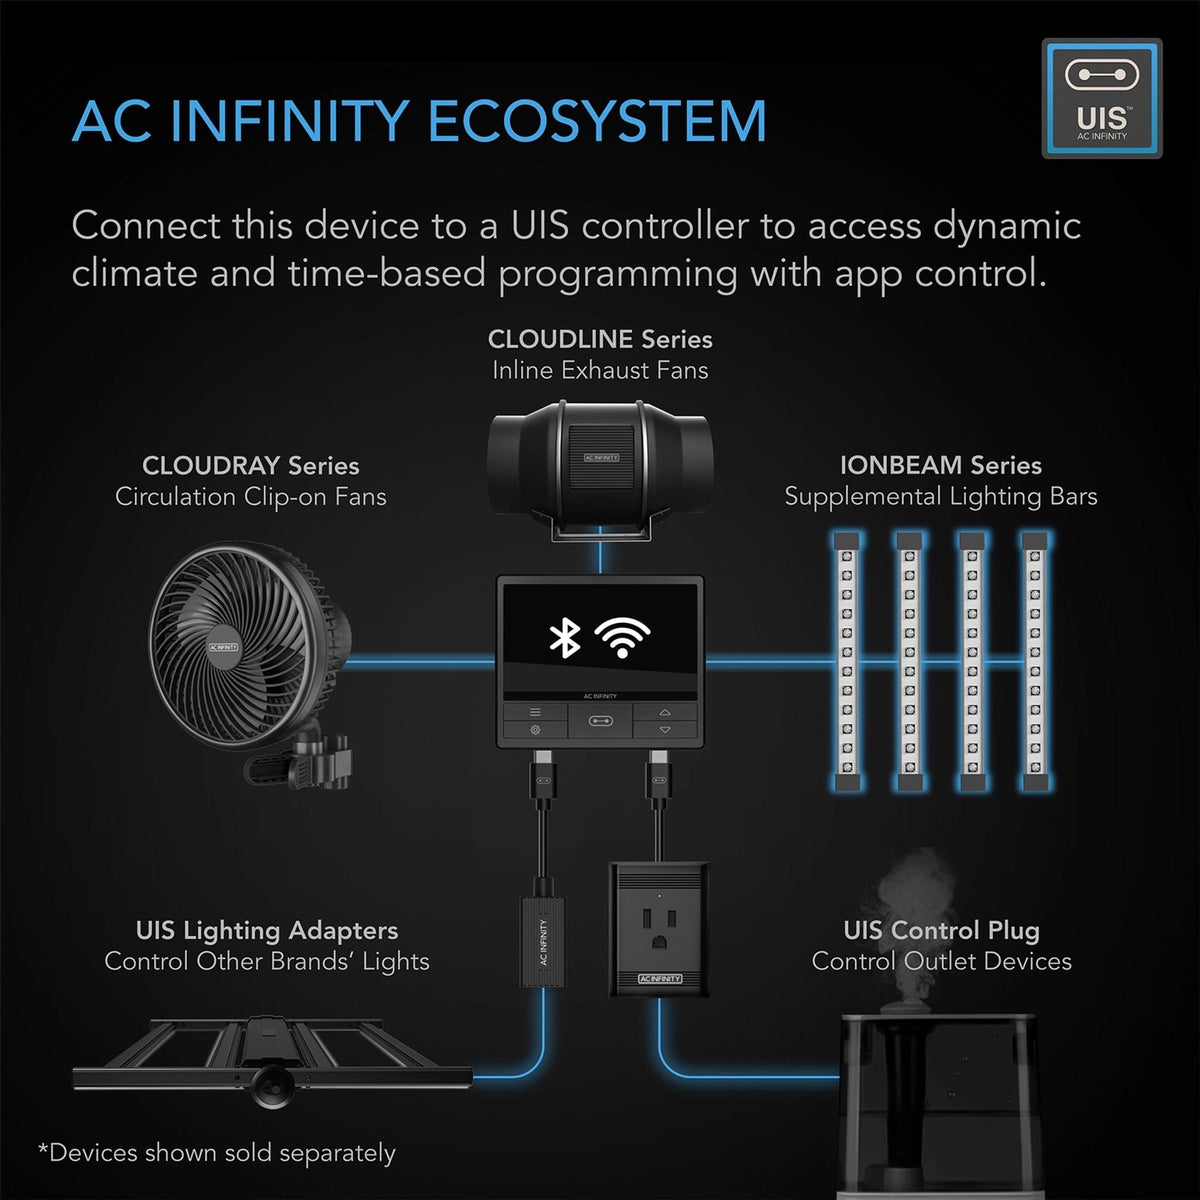 AC Infinity Ecosystem works with controller 69